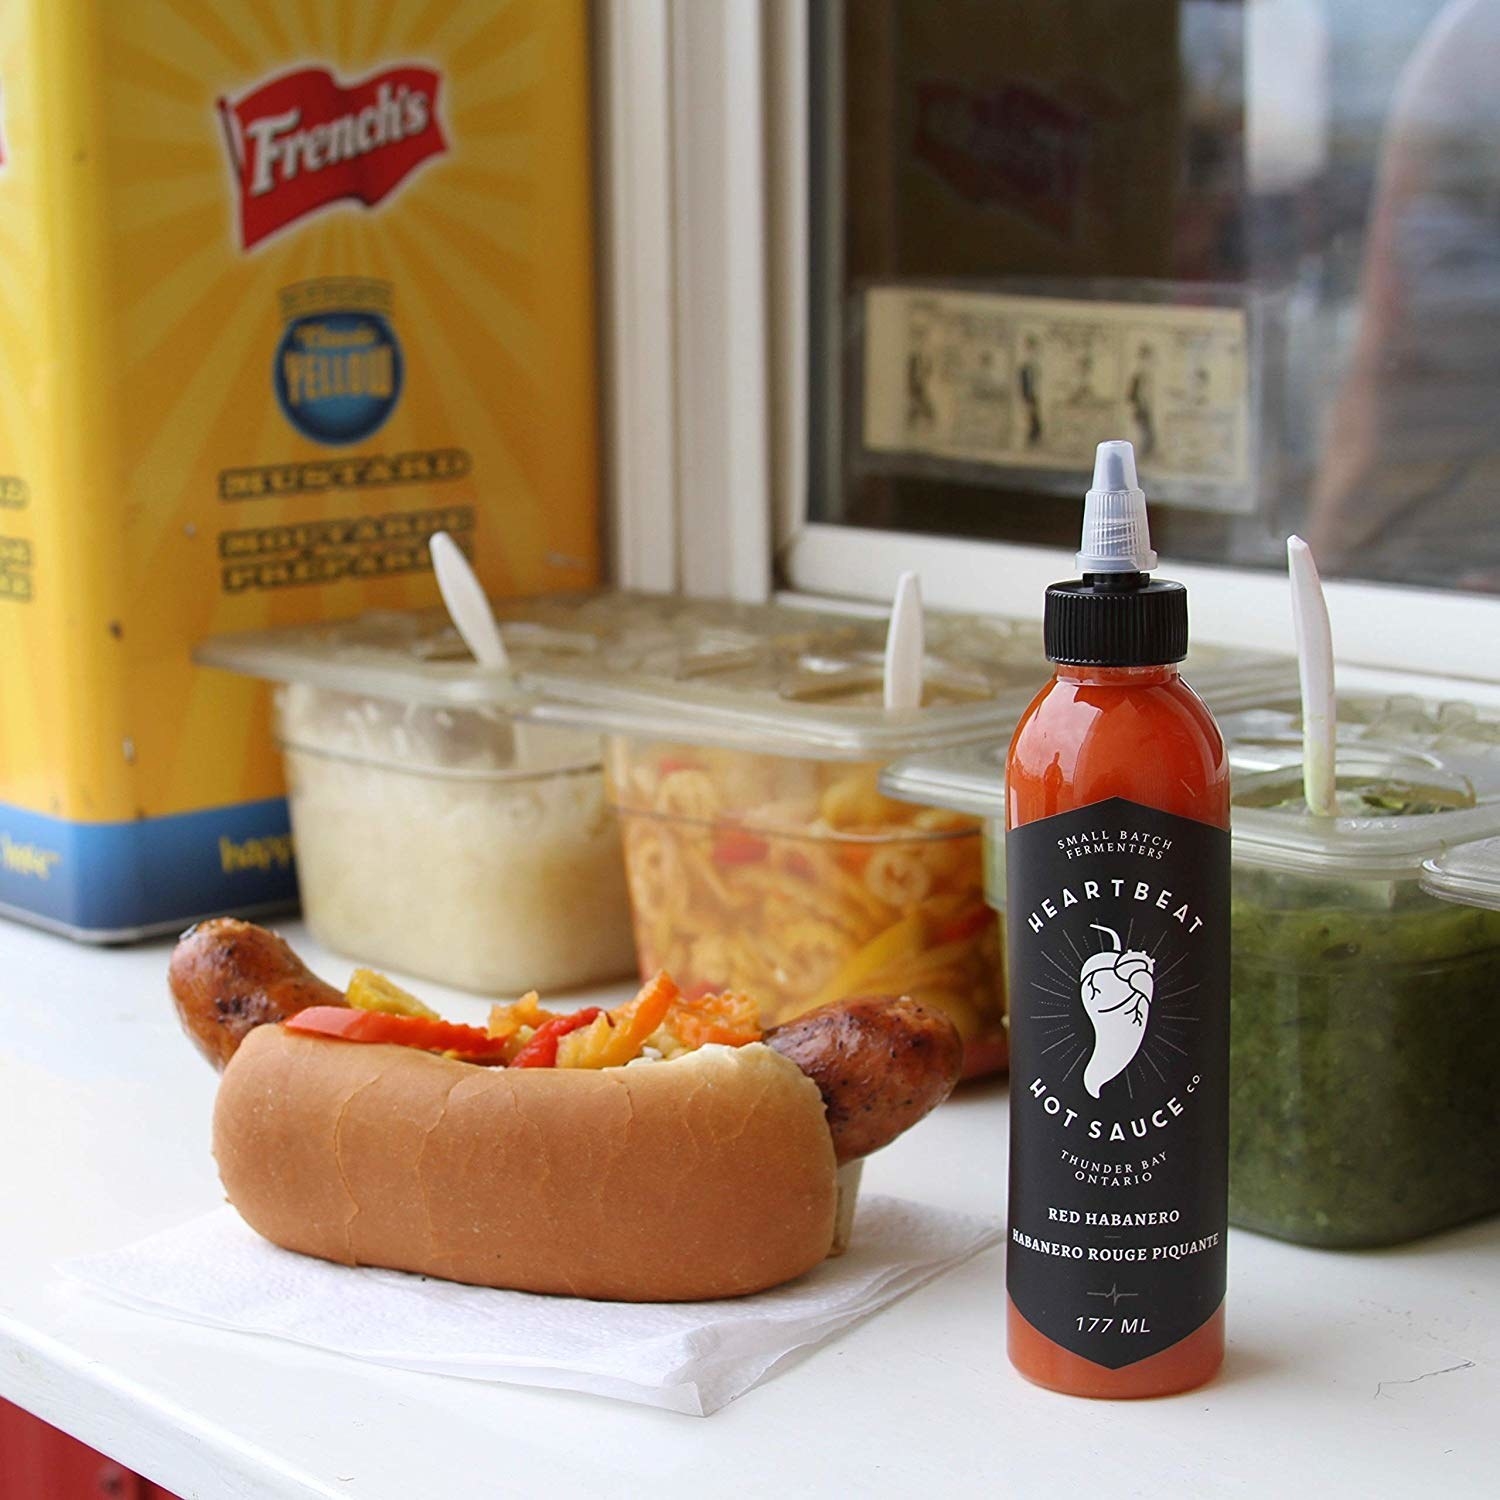 A bottle of the hot sauce next to a hot dog